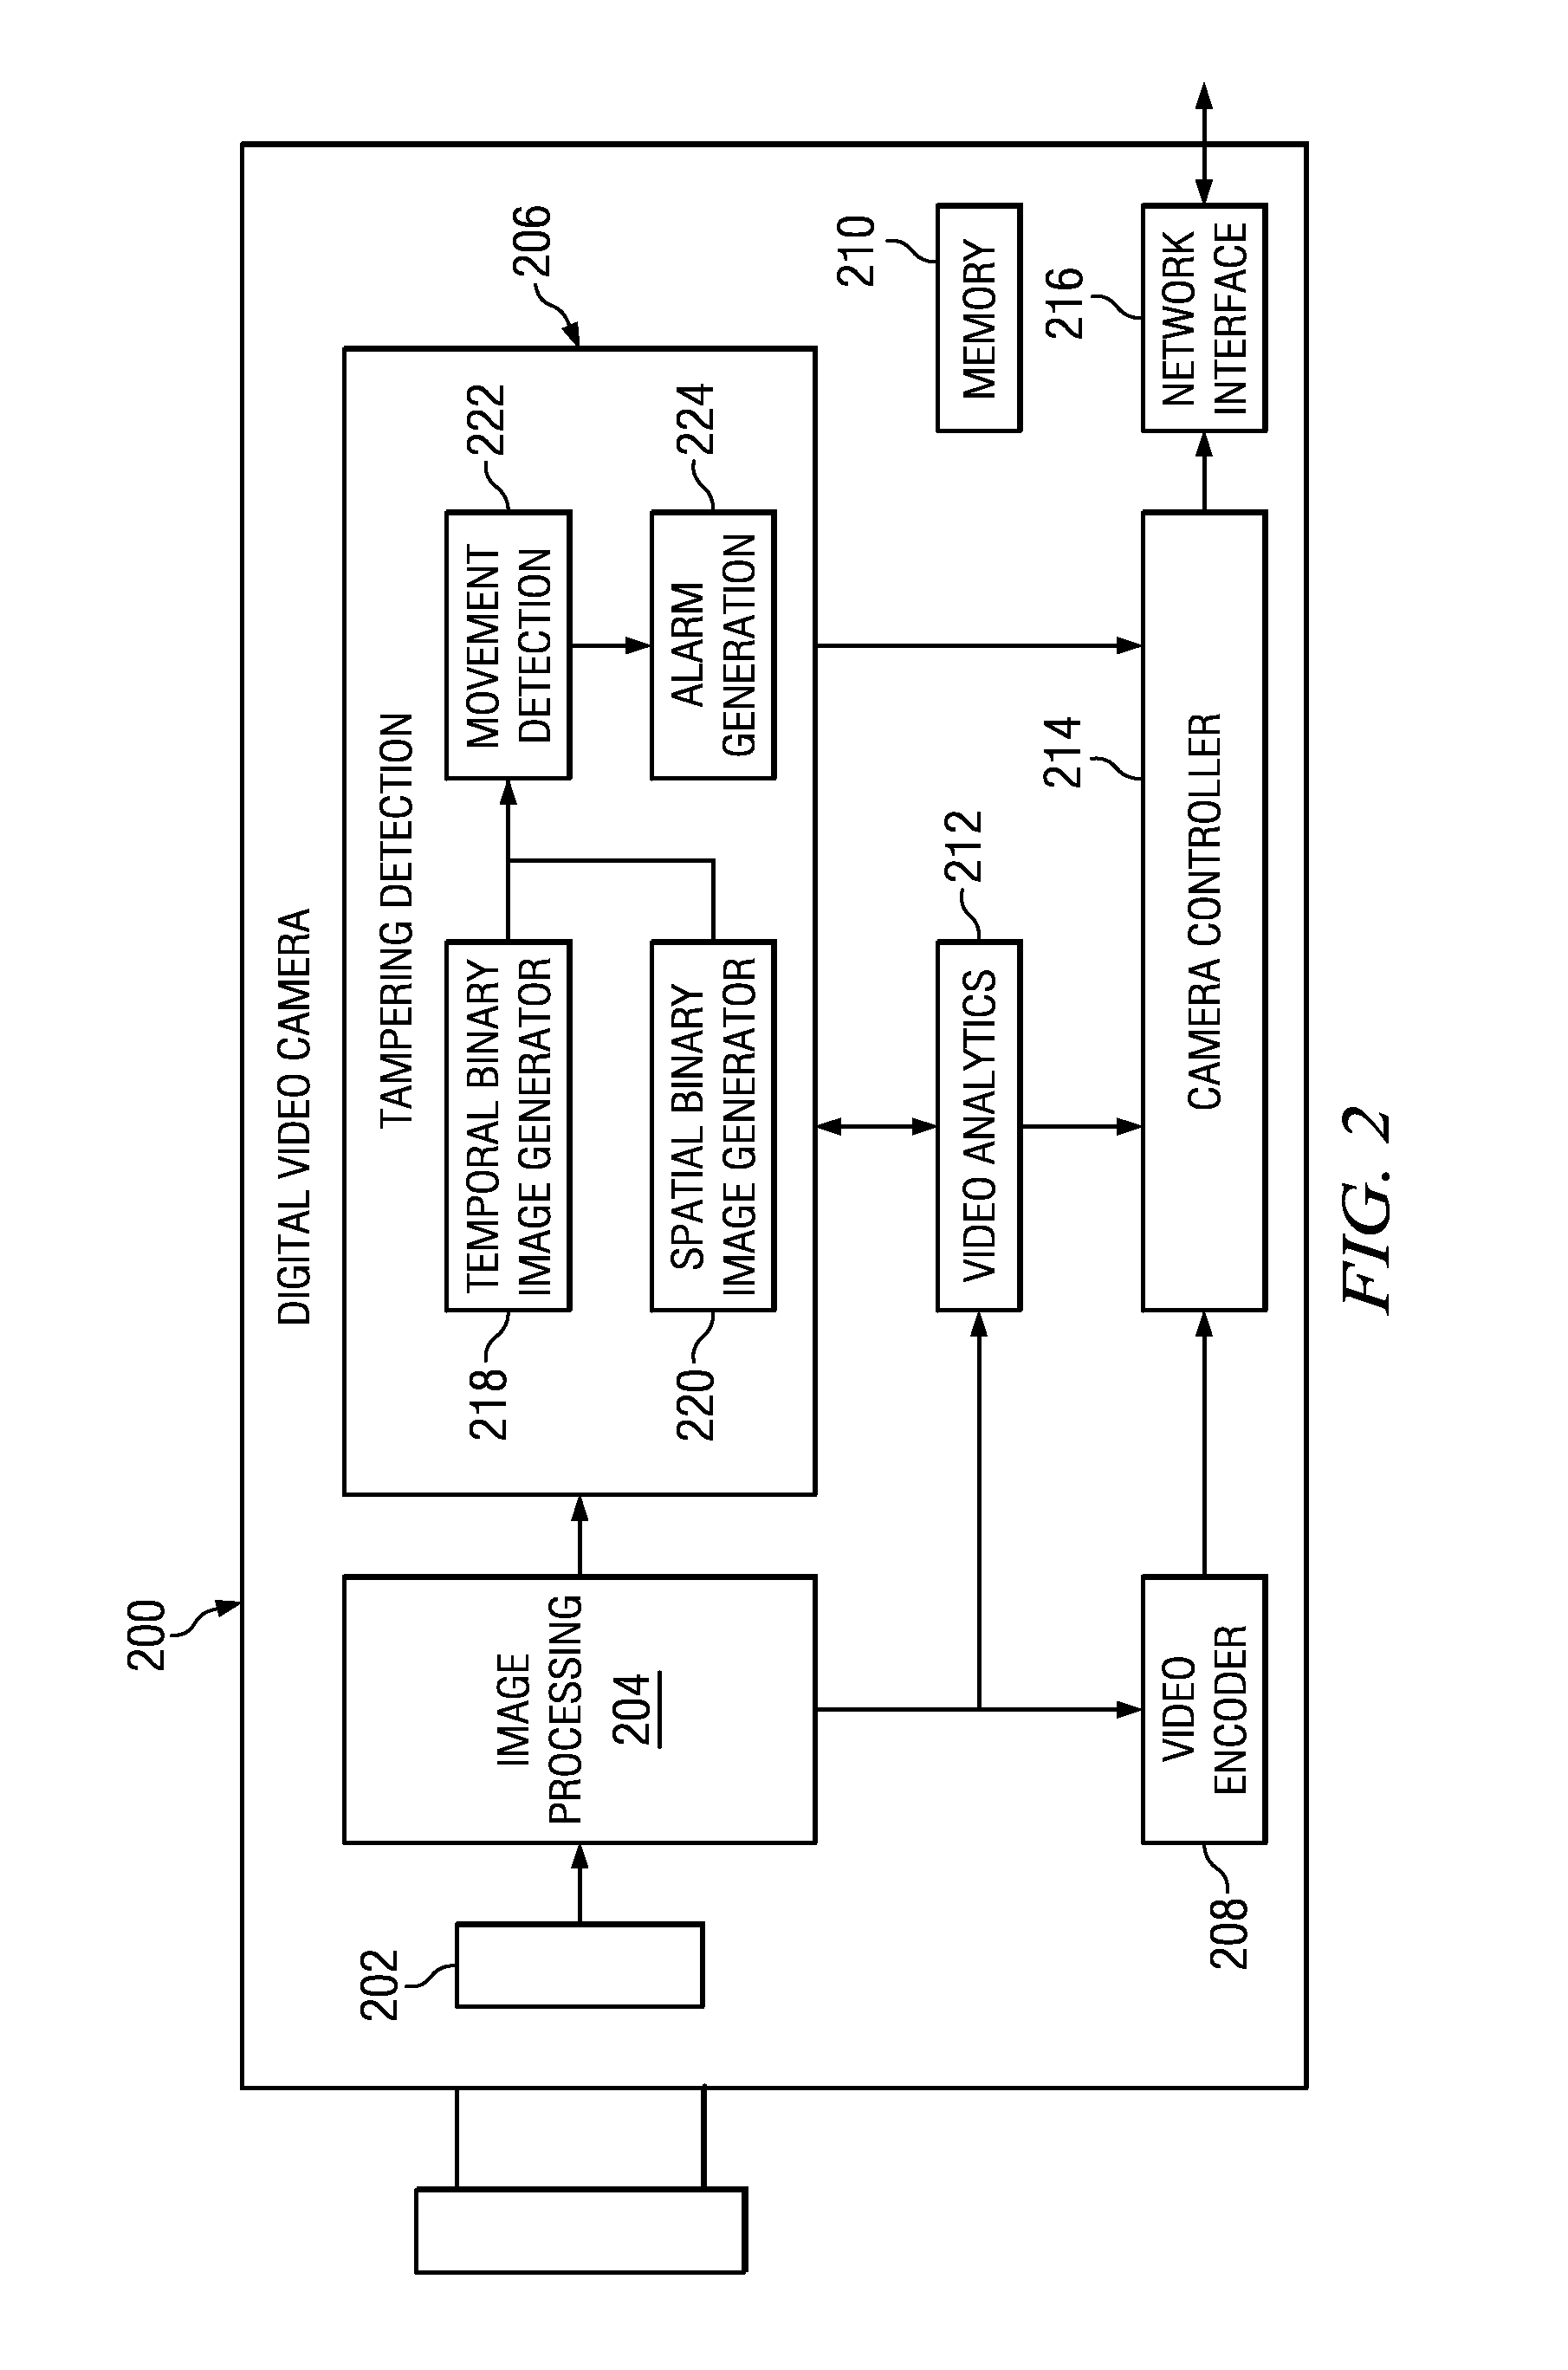 Detection of Movement of a Stationary Video Camera